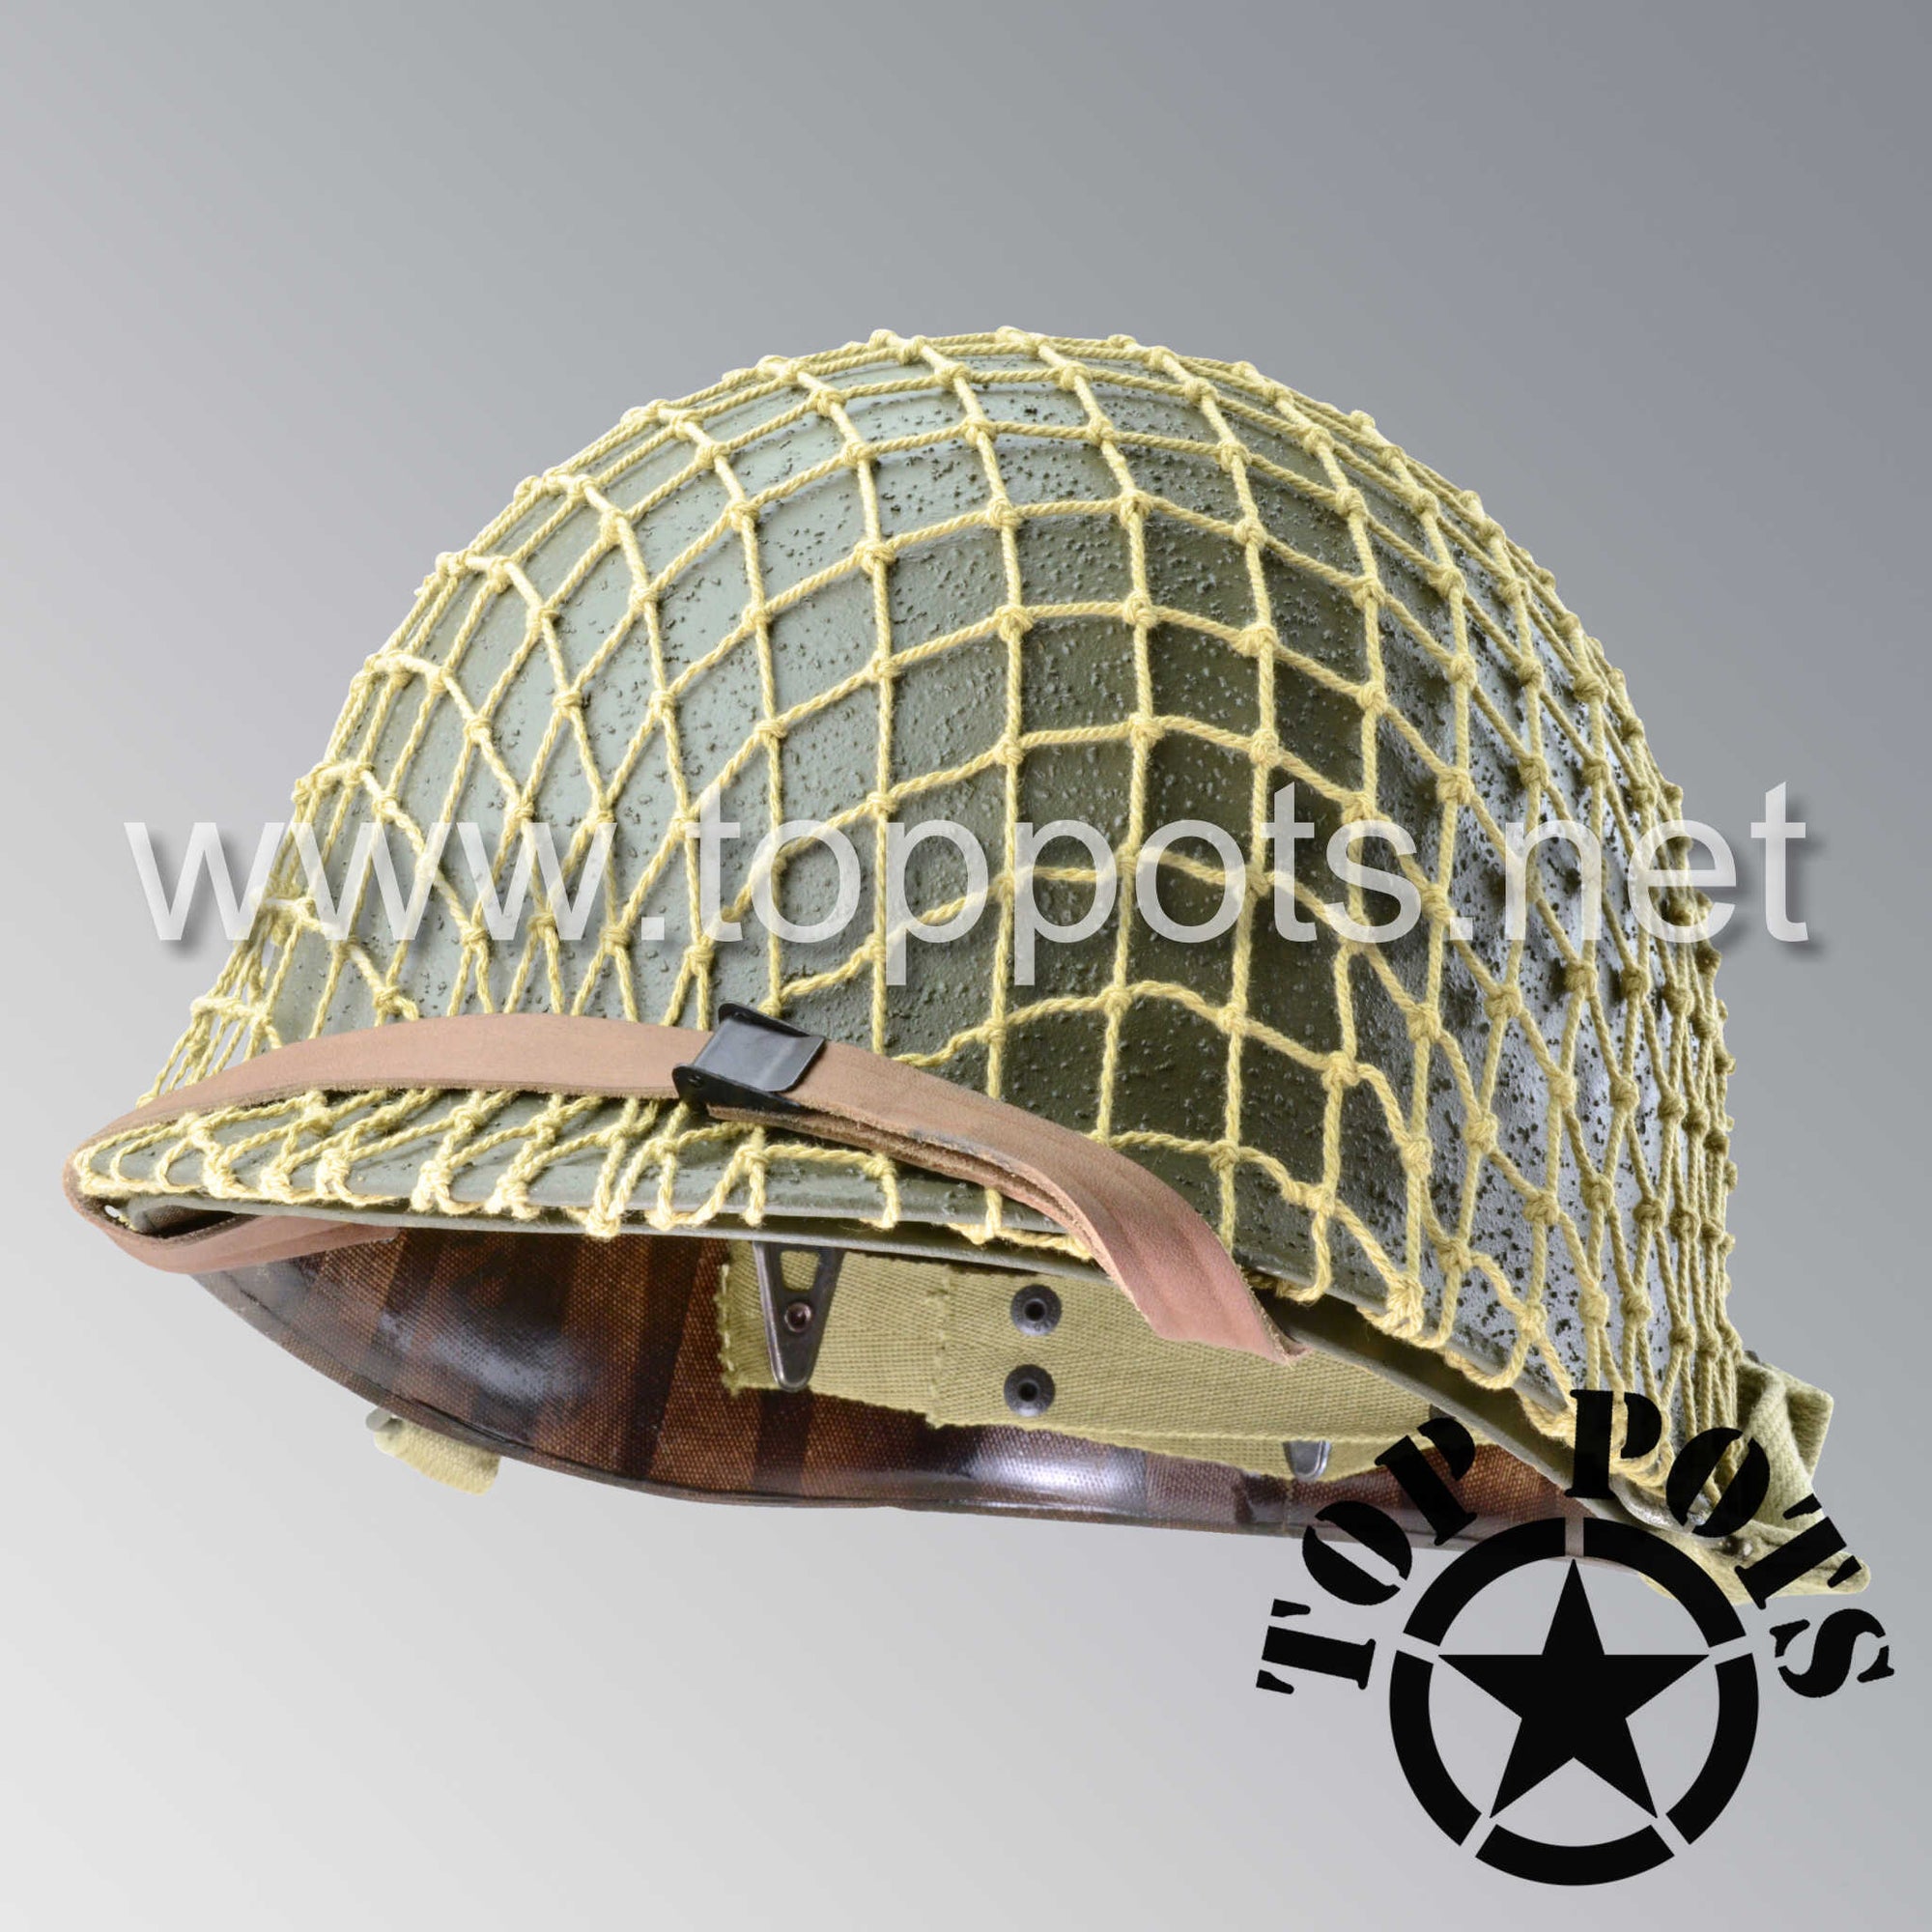 WWII US Army Restored Original M1 Infantry Helmet Swivel Bale McCord Shell and Liner with Khaki Net